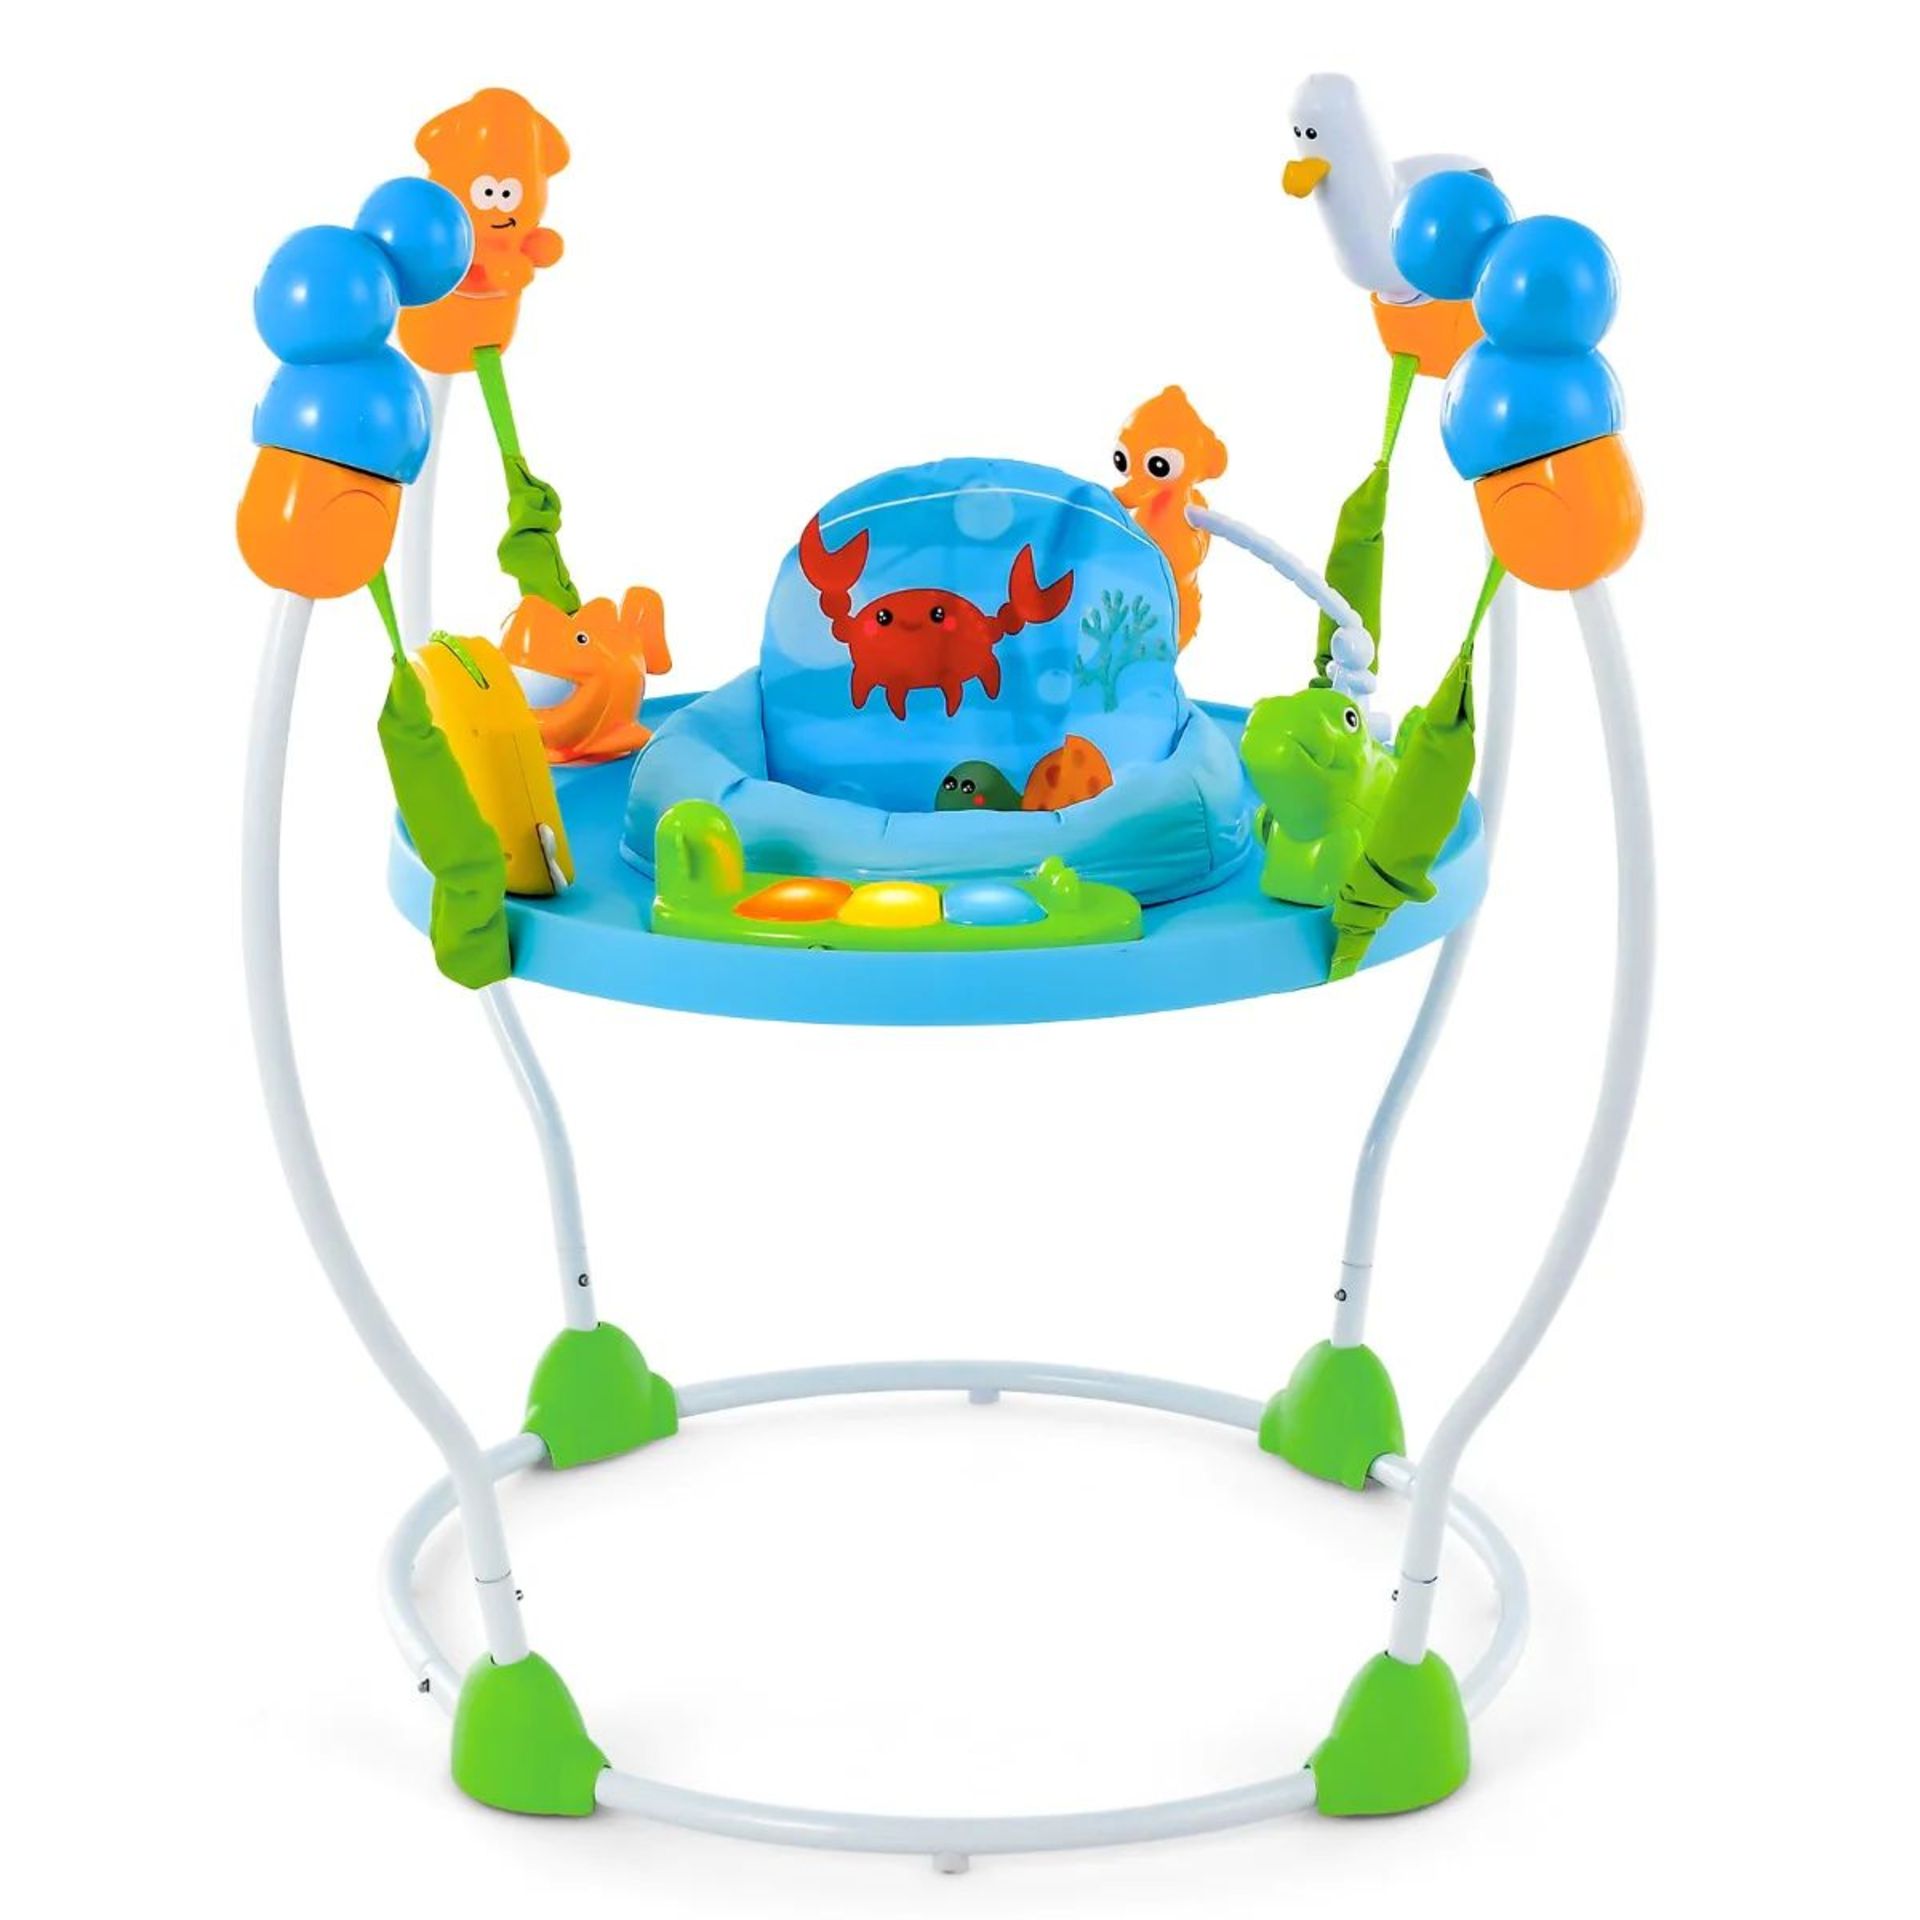 Underwater World Themed Baby Jumper with 5 Adjustable Heights and Removable Seat Cushion-Blue. -